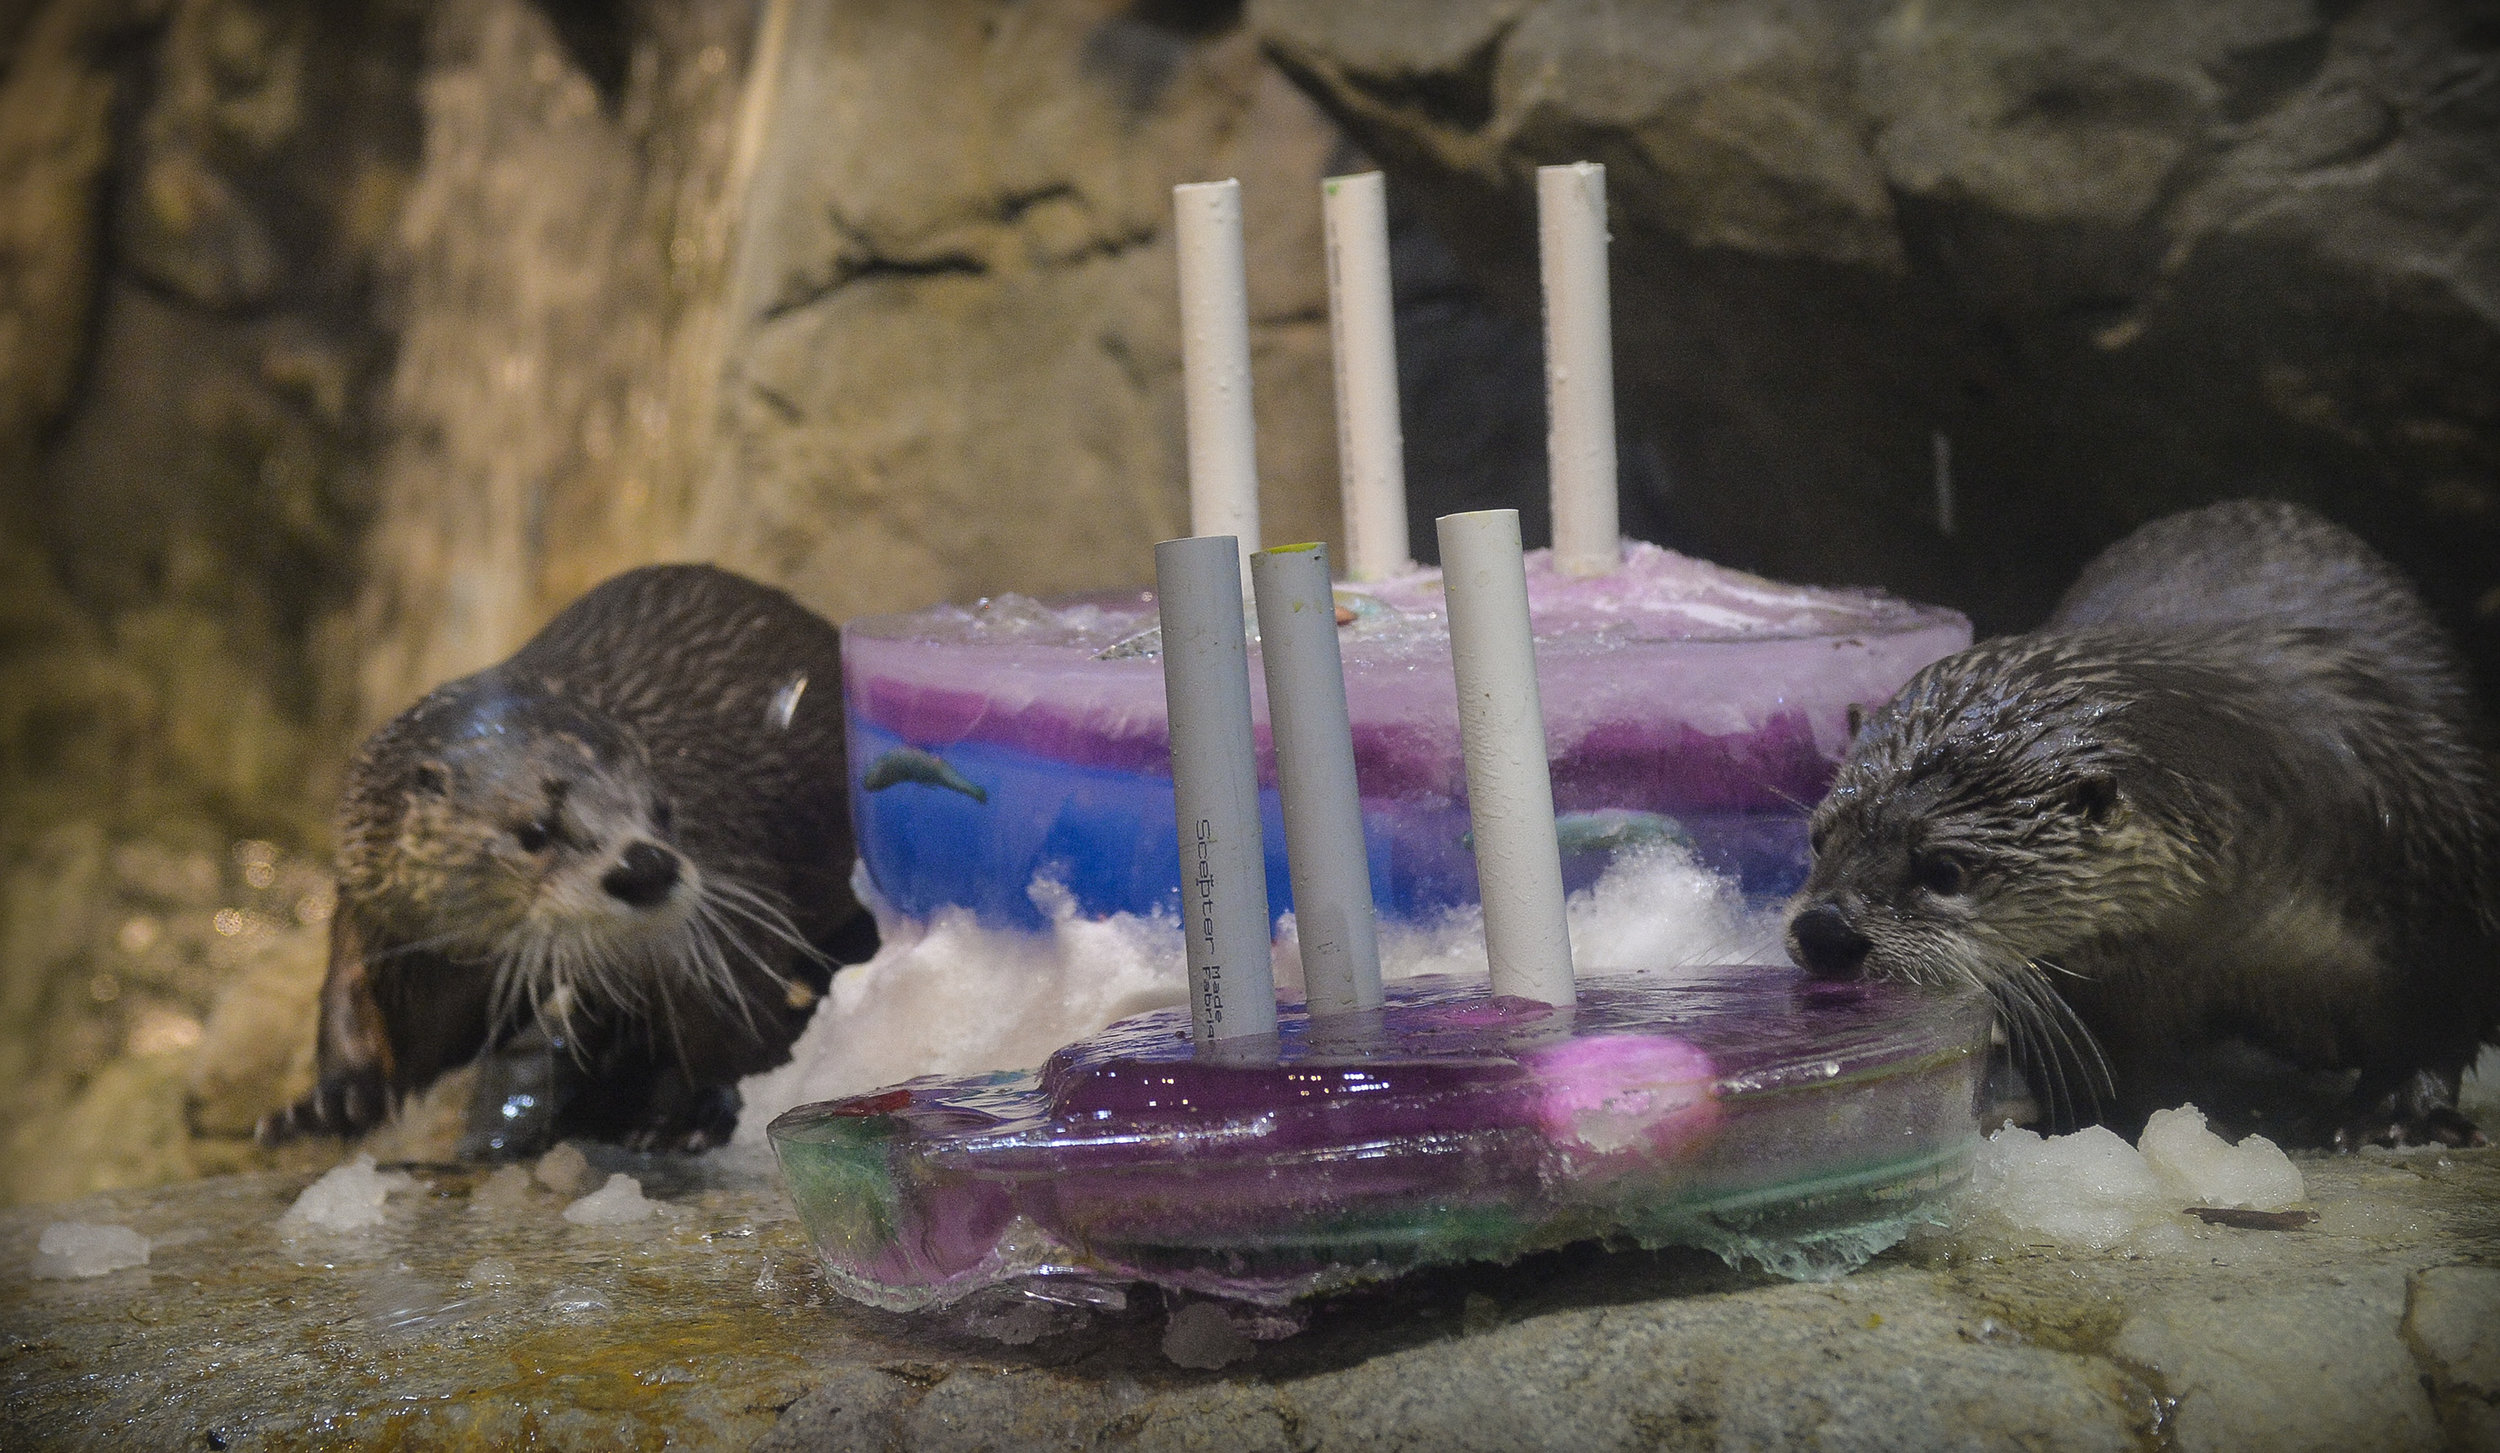 Otters Have an Icy Birthday Cake